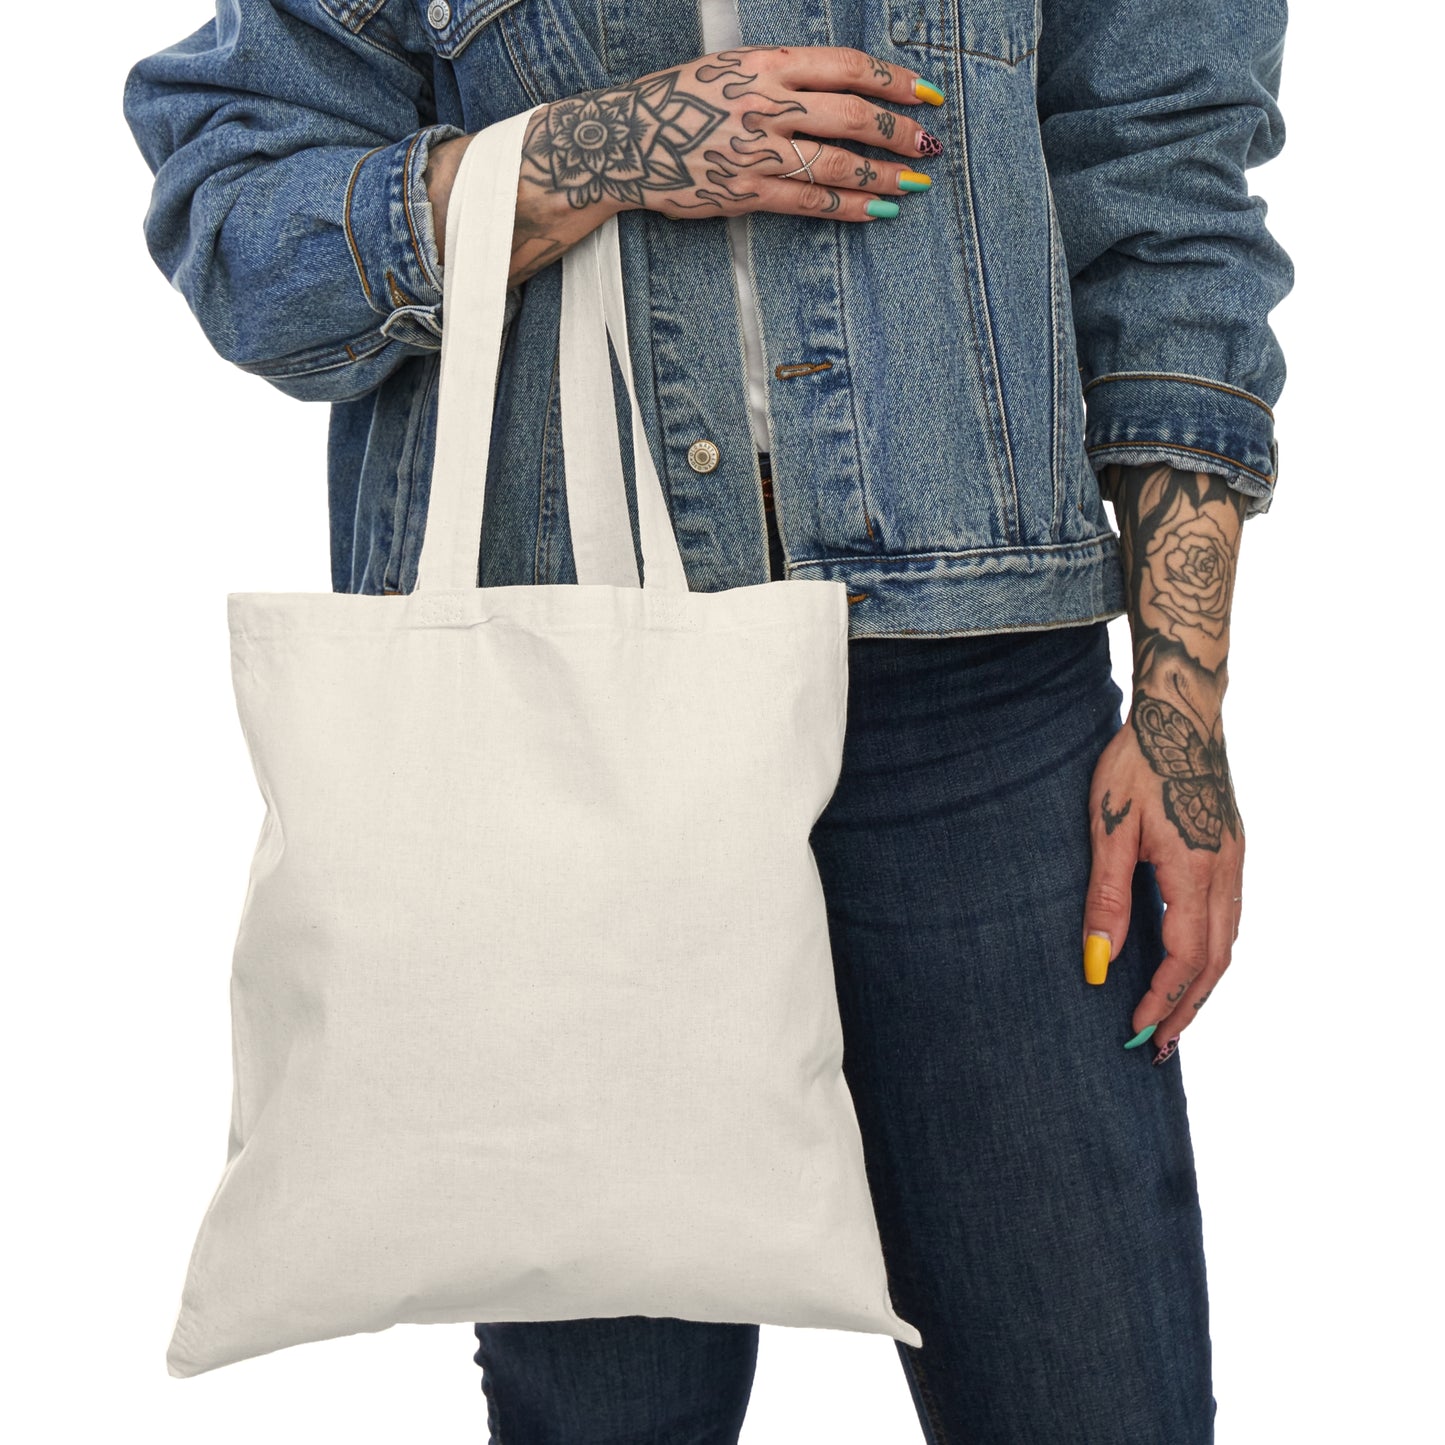 "A Casual Stroll" Tote